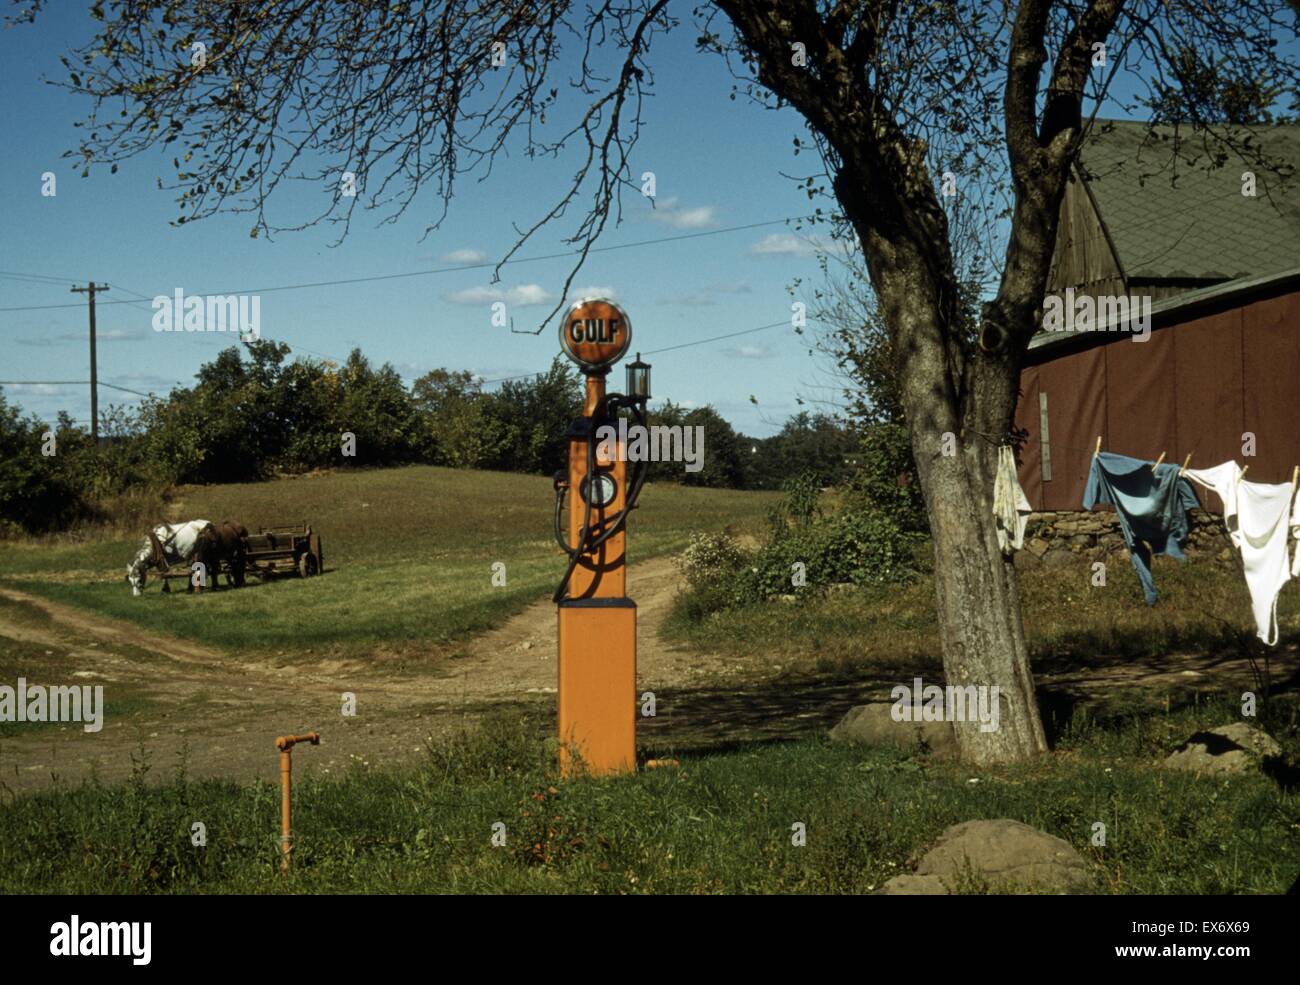 Gas pump with clothesline, barn and horse-drawn wagon in background. between 1941 and 1942. Colour. Stock Photo